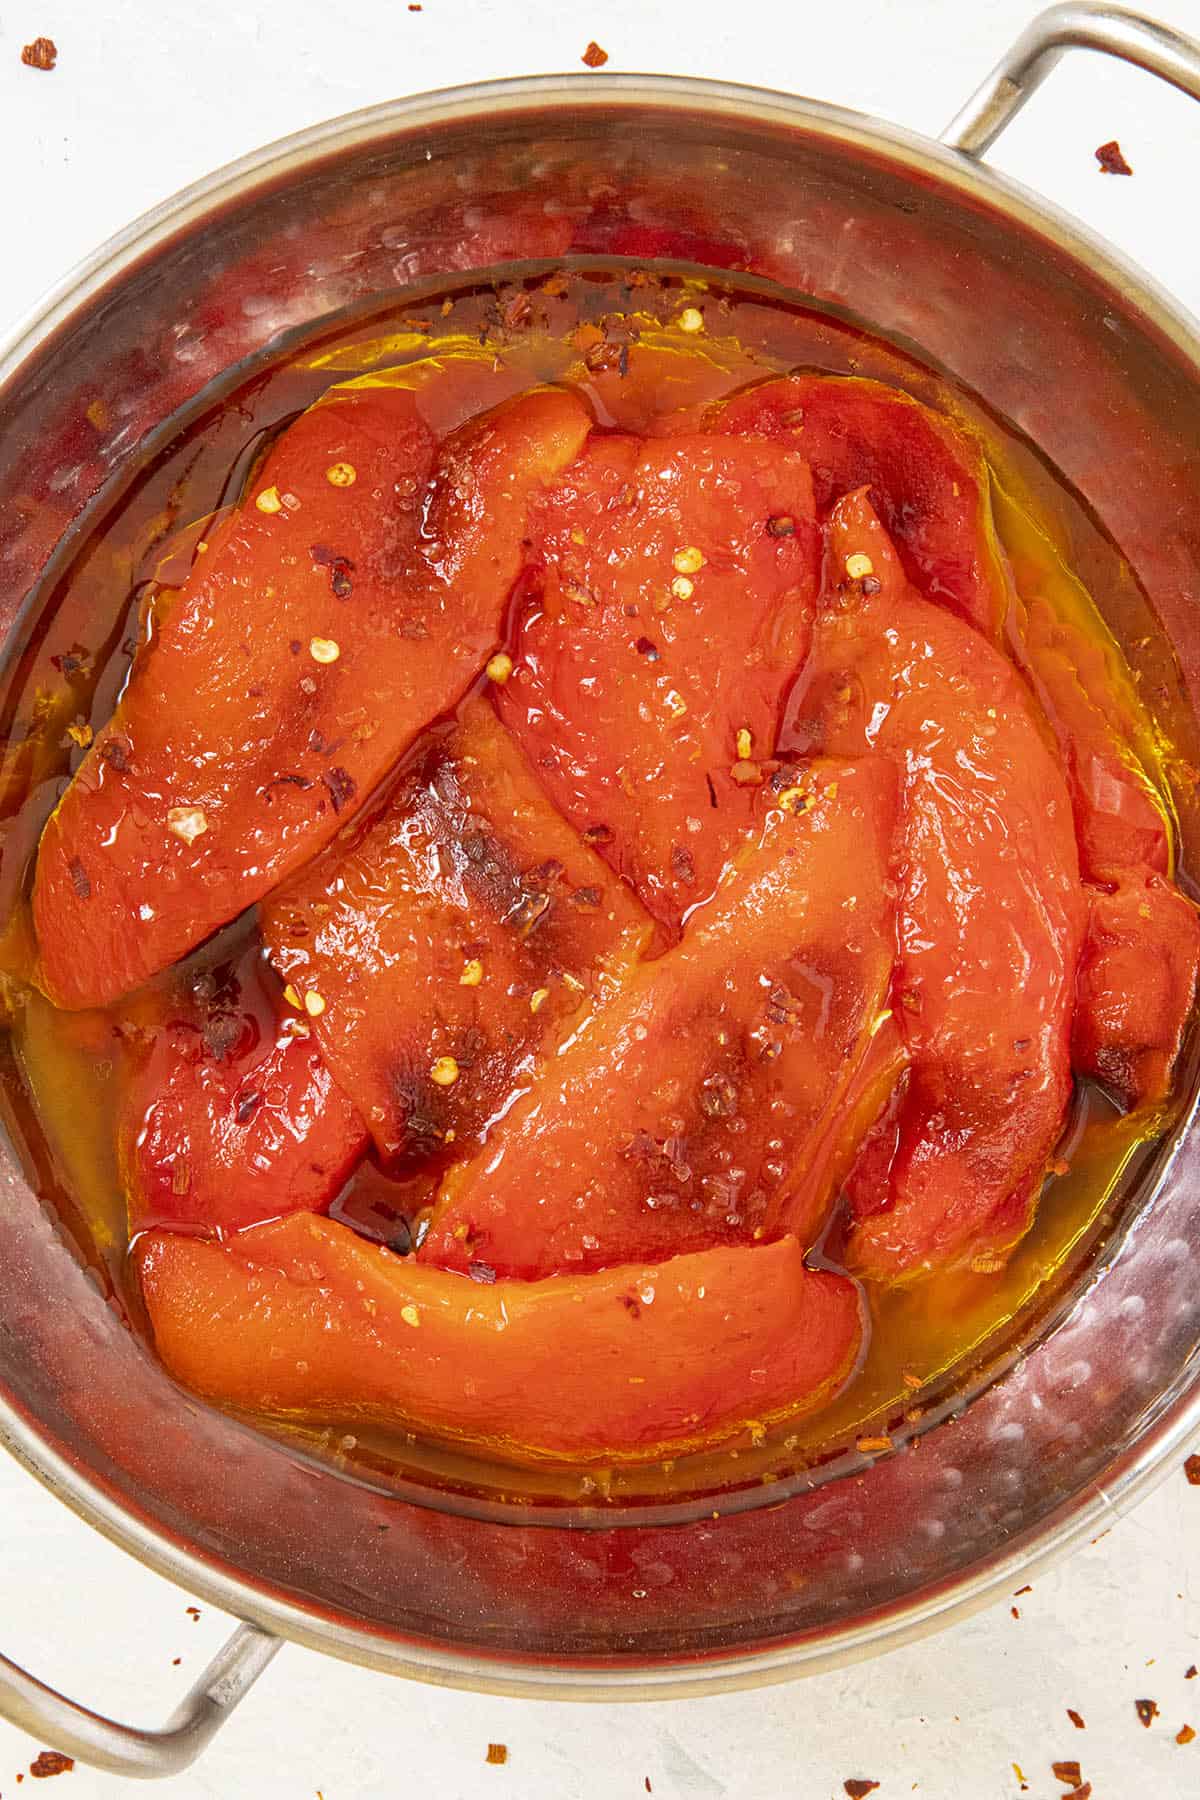 Roasted Red Peppers in a bowl with lots of olive oil, sprinkled with chili flakes